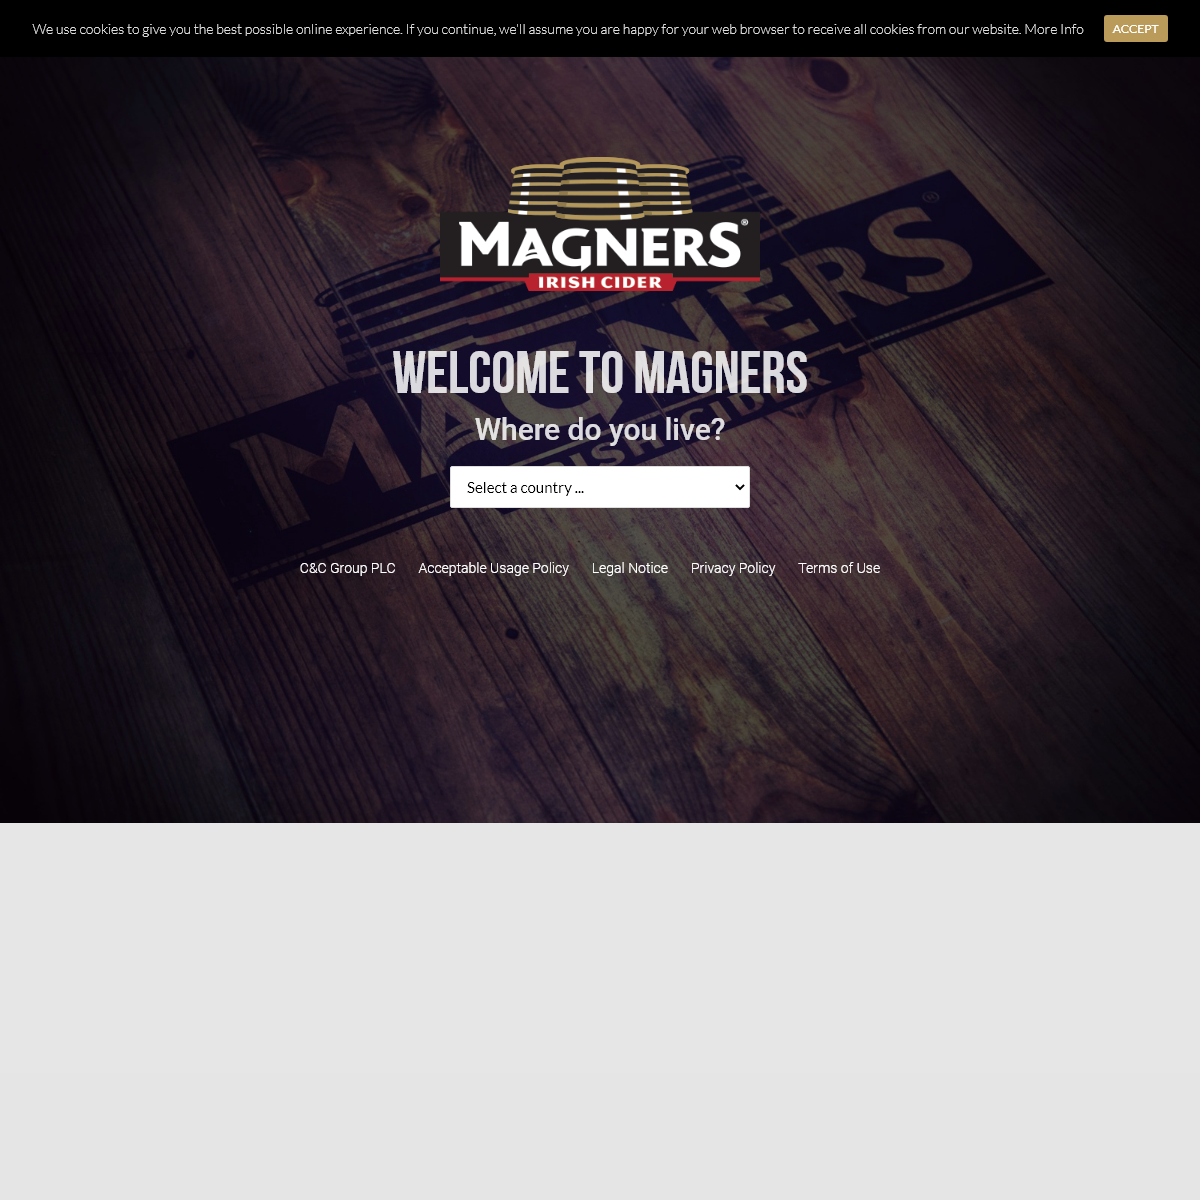 A complete backup of magners.com